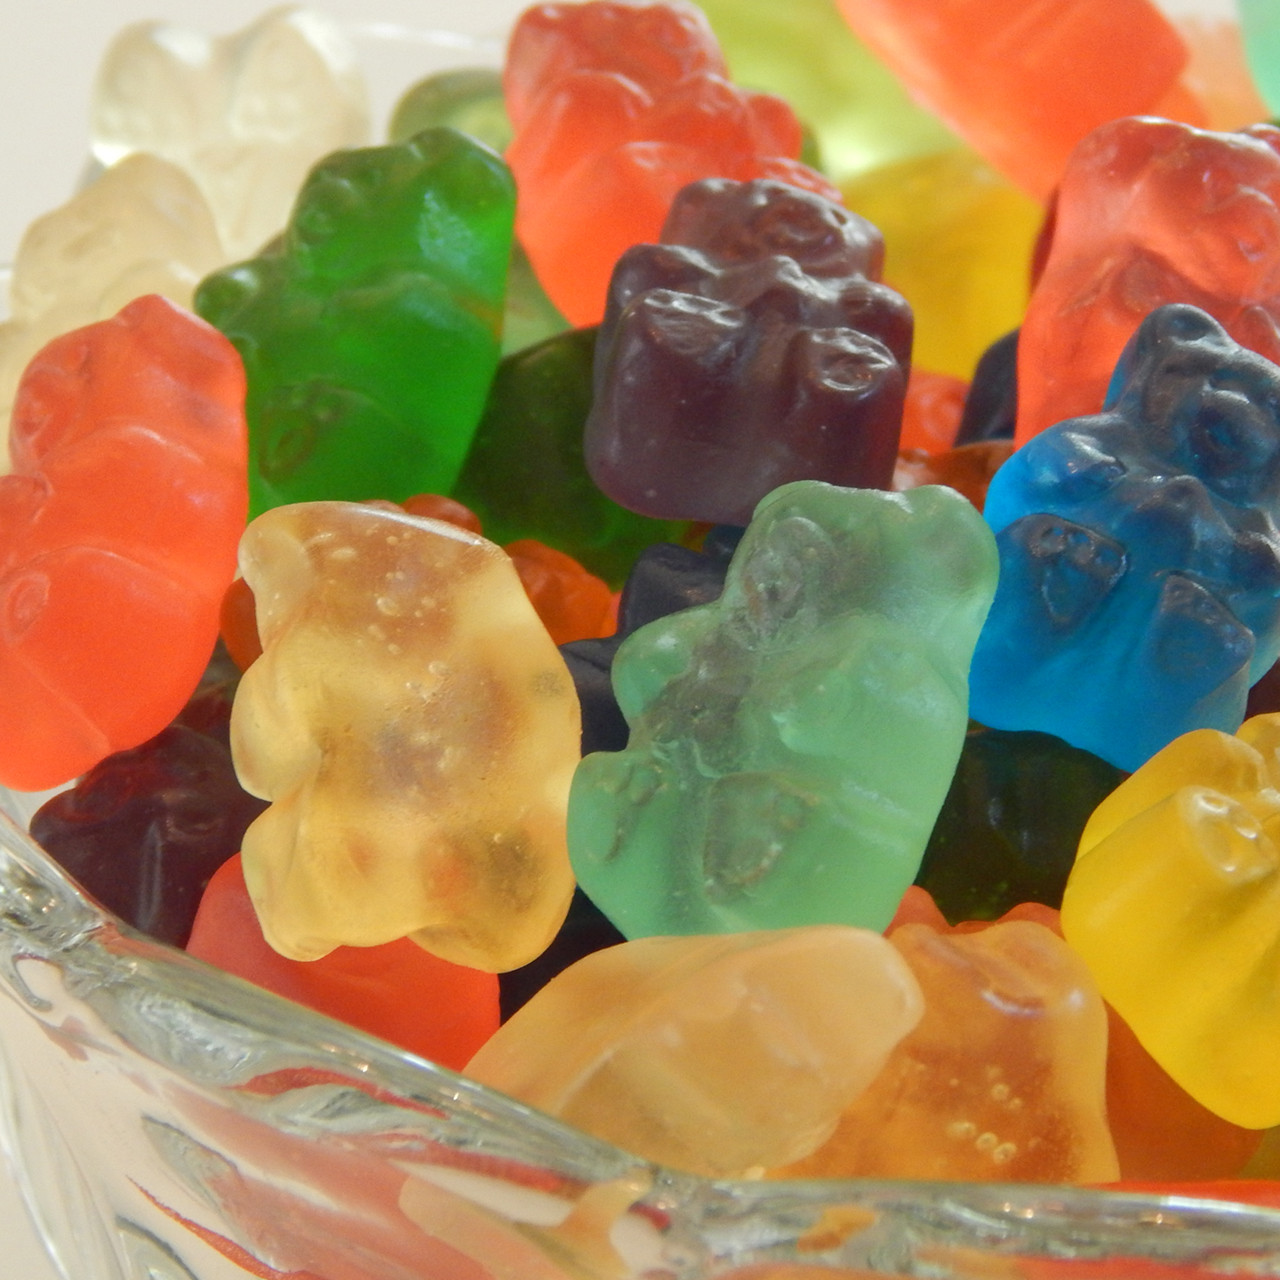 Sincerely Nuts Gummy Bears